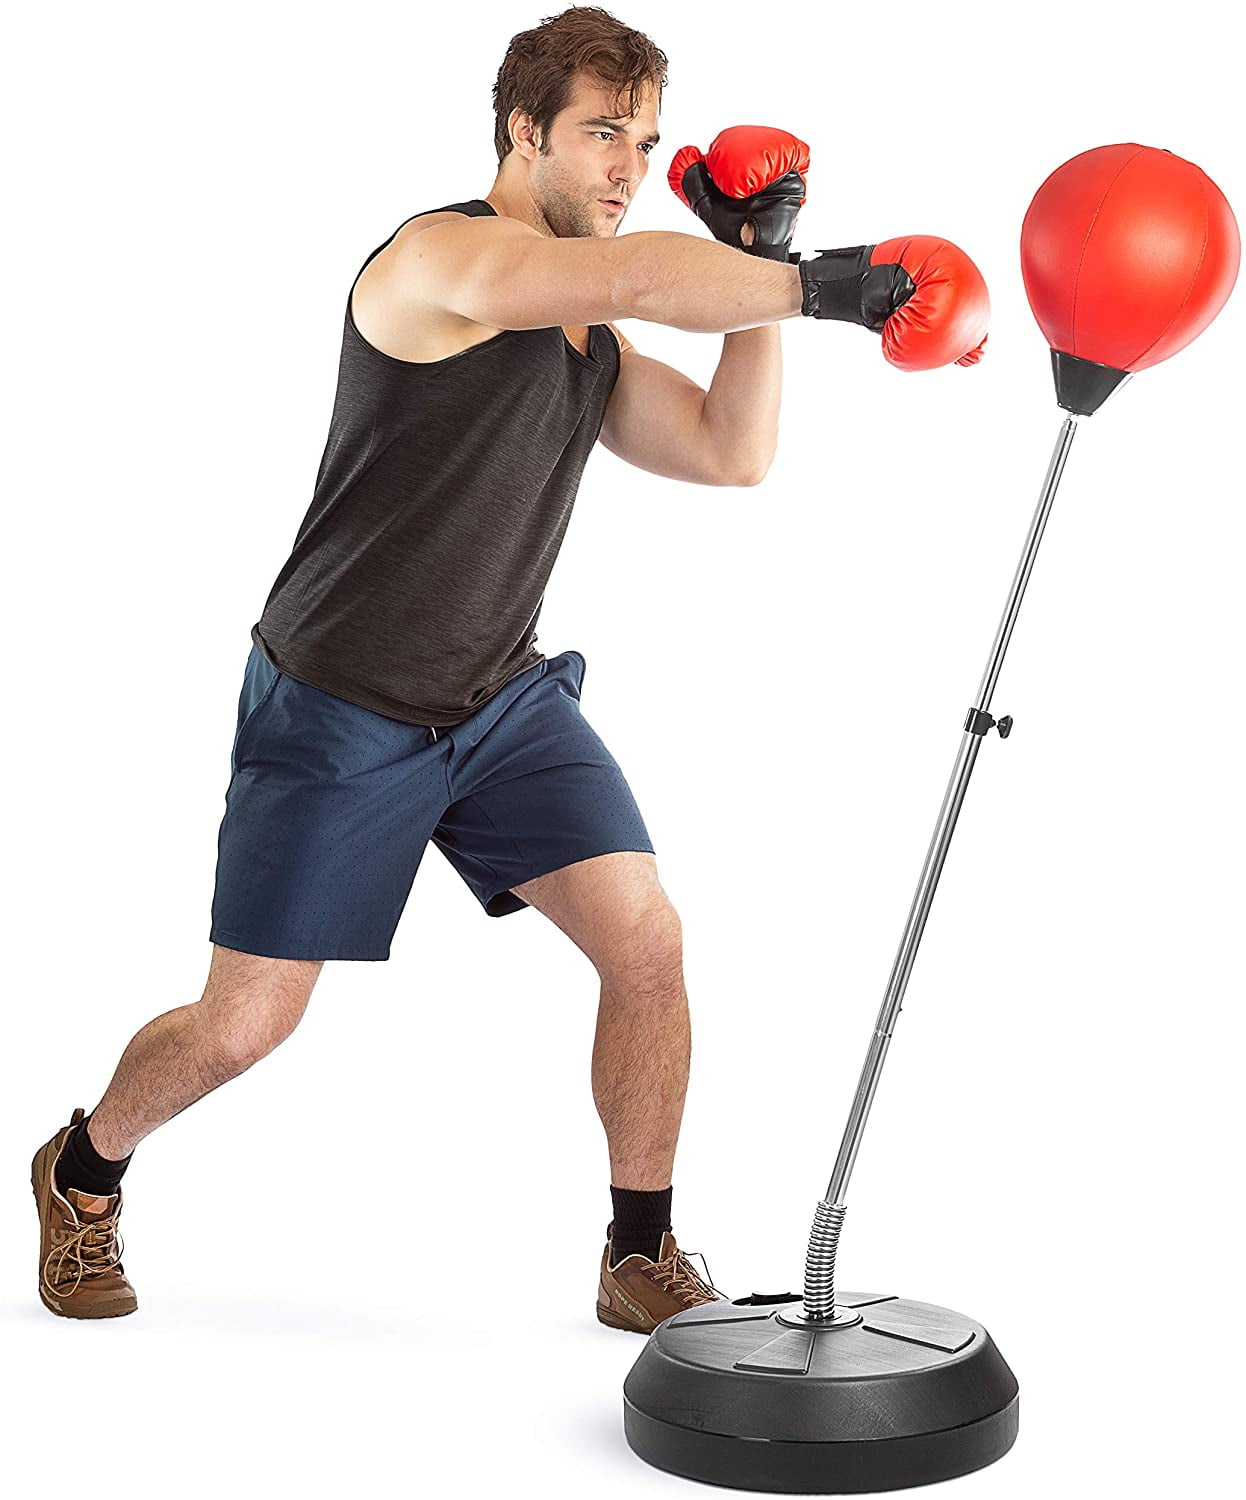 Kids Boxing Punch Exercise Bag Ball w/Gloves For Speed Training Stand HOT 